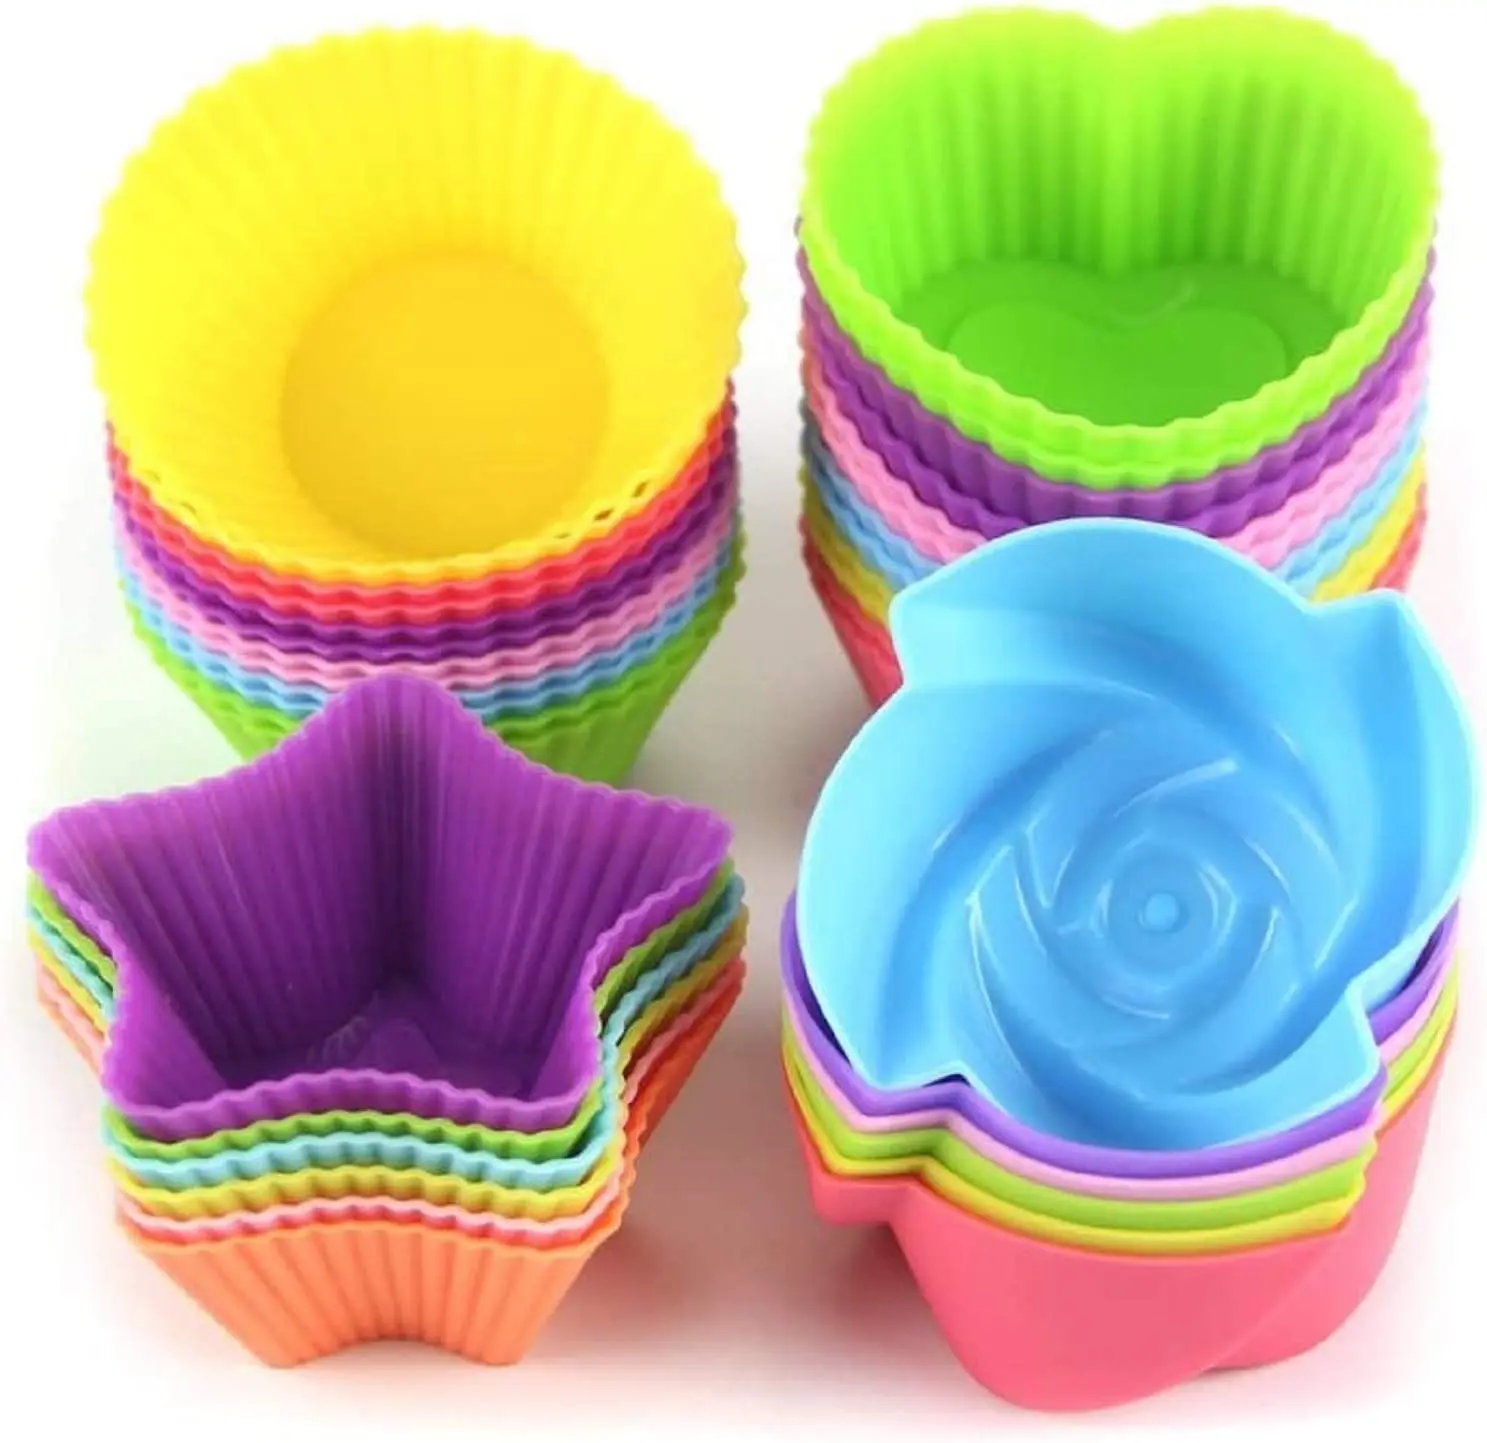 

24pc Silicone Cupcake Liners Reusable Baking Cups Nonstick Easy Clean Pastry Muffin Molds 4 Shapes Round, Stars, Heart, Flowers